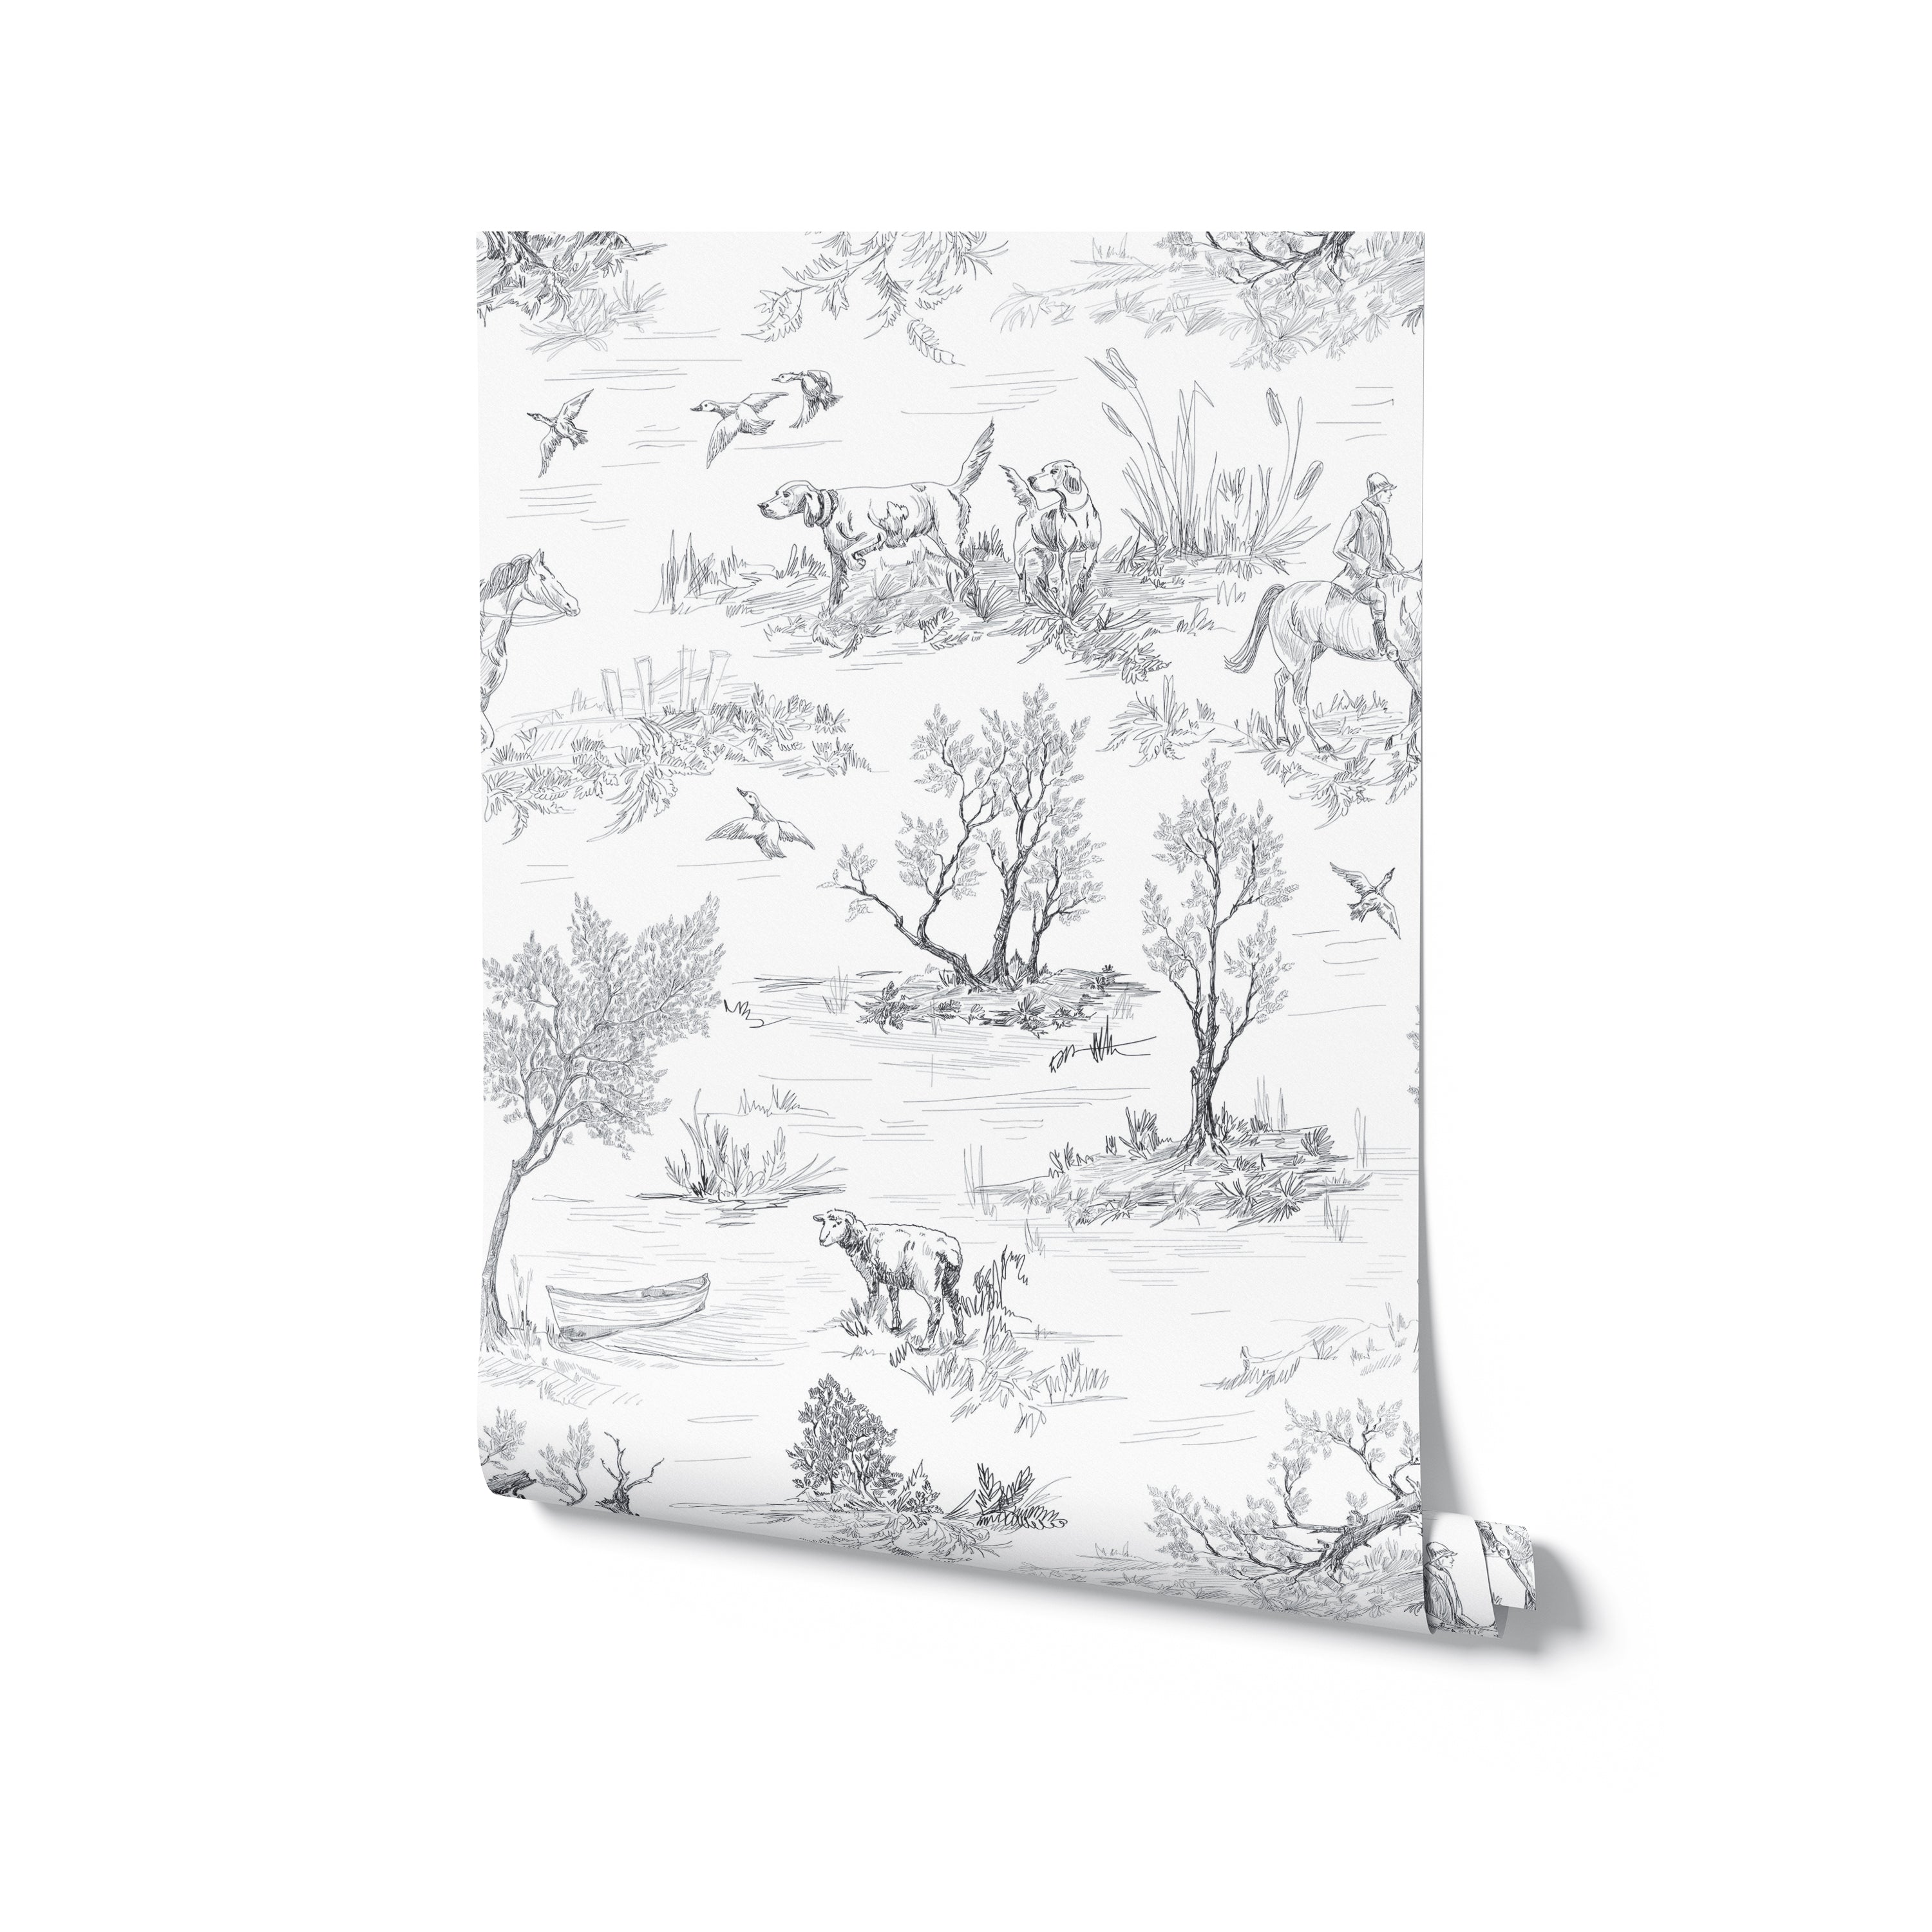 a roll of "Outdoor Friend Sketch Wallpaper." The roll is partially unrolled to reveal the detailed countryside sketches that offer a nostalgic touch to any room. The continuous line drawings depict a serene outdoor life, ideal for enveloping a room in a tranquil, storybook quality.